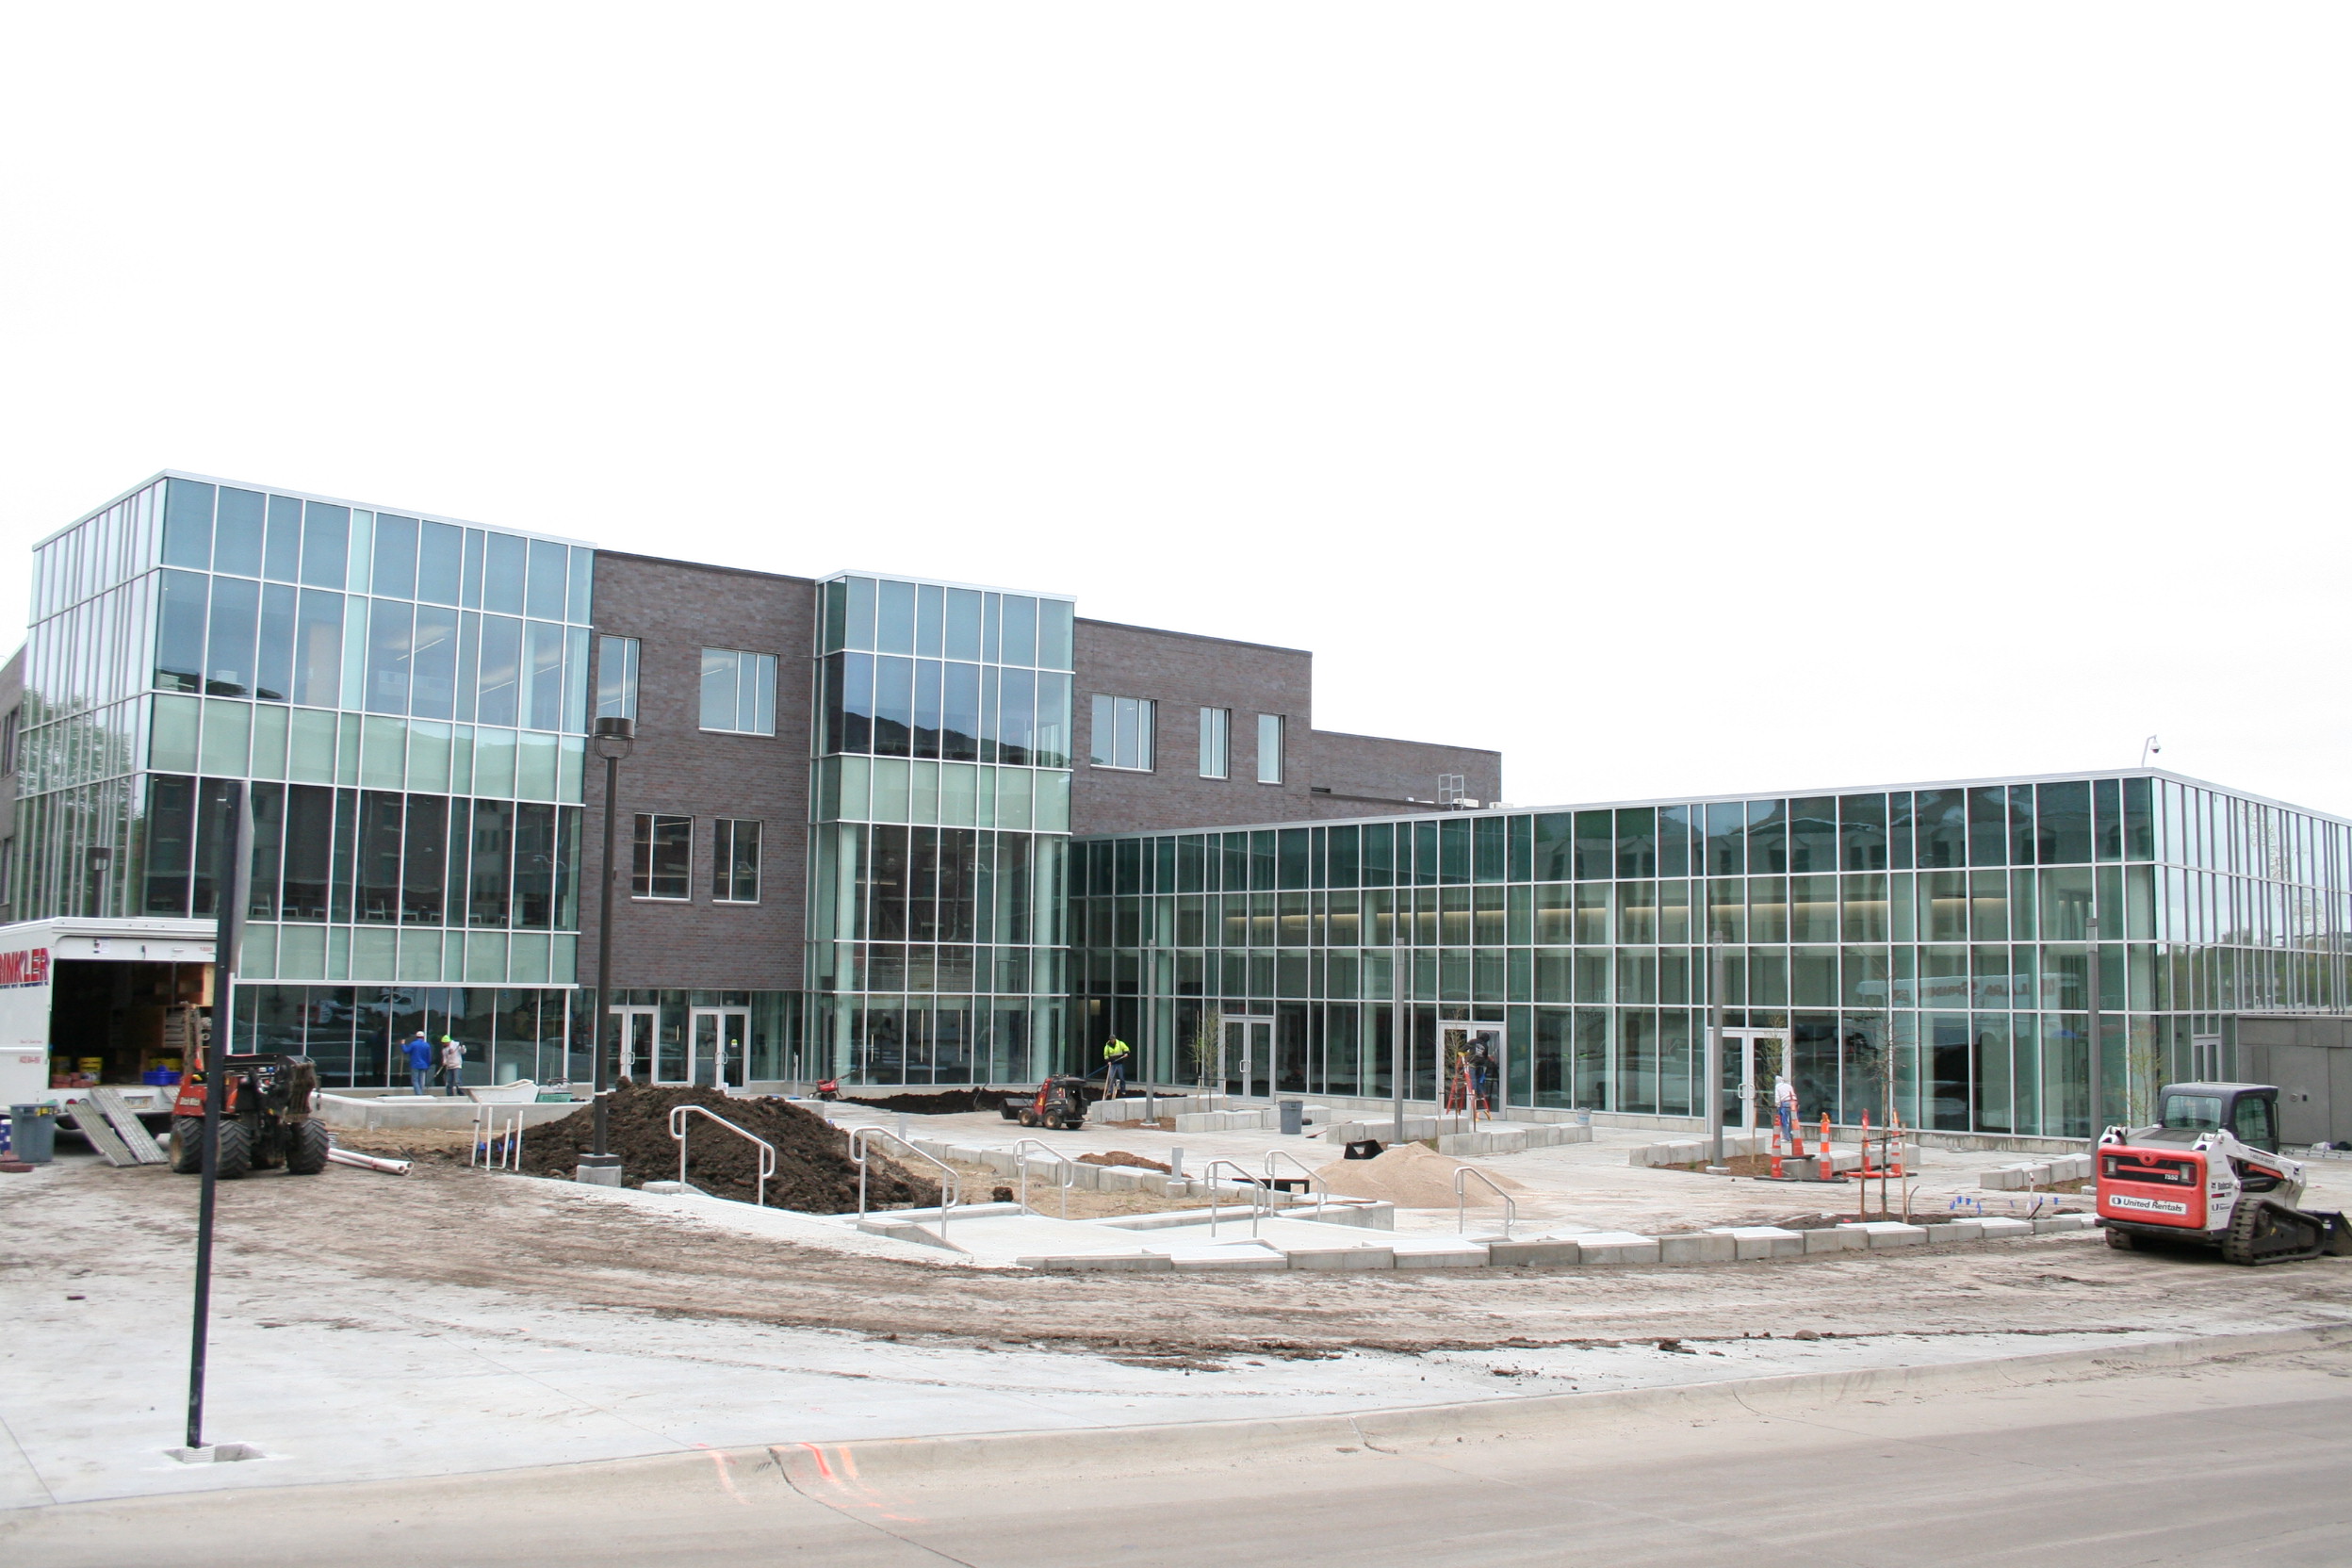 New Willa S. Cather Dining Complex located on 17th Street.